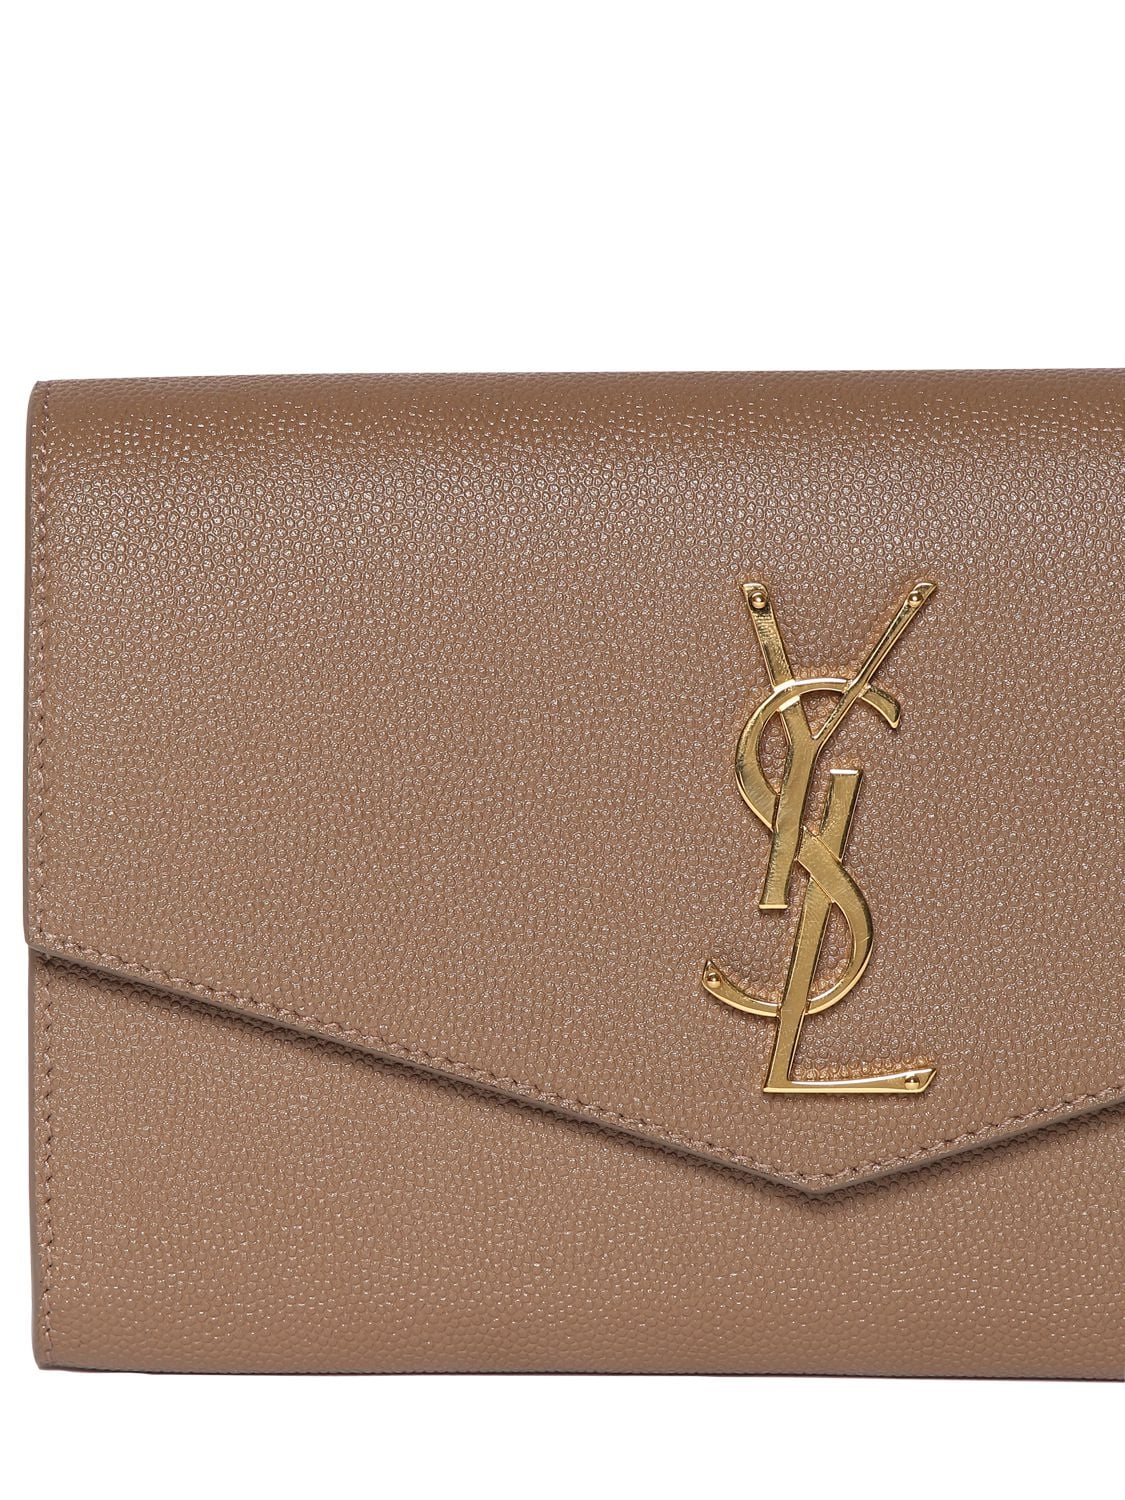 Yves Saint Laurent White Grained Leather Metalasse Wallet on Chain Bag -  Yoogi's Closet